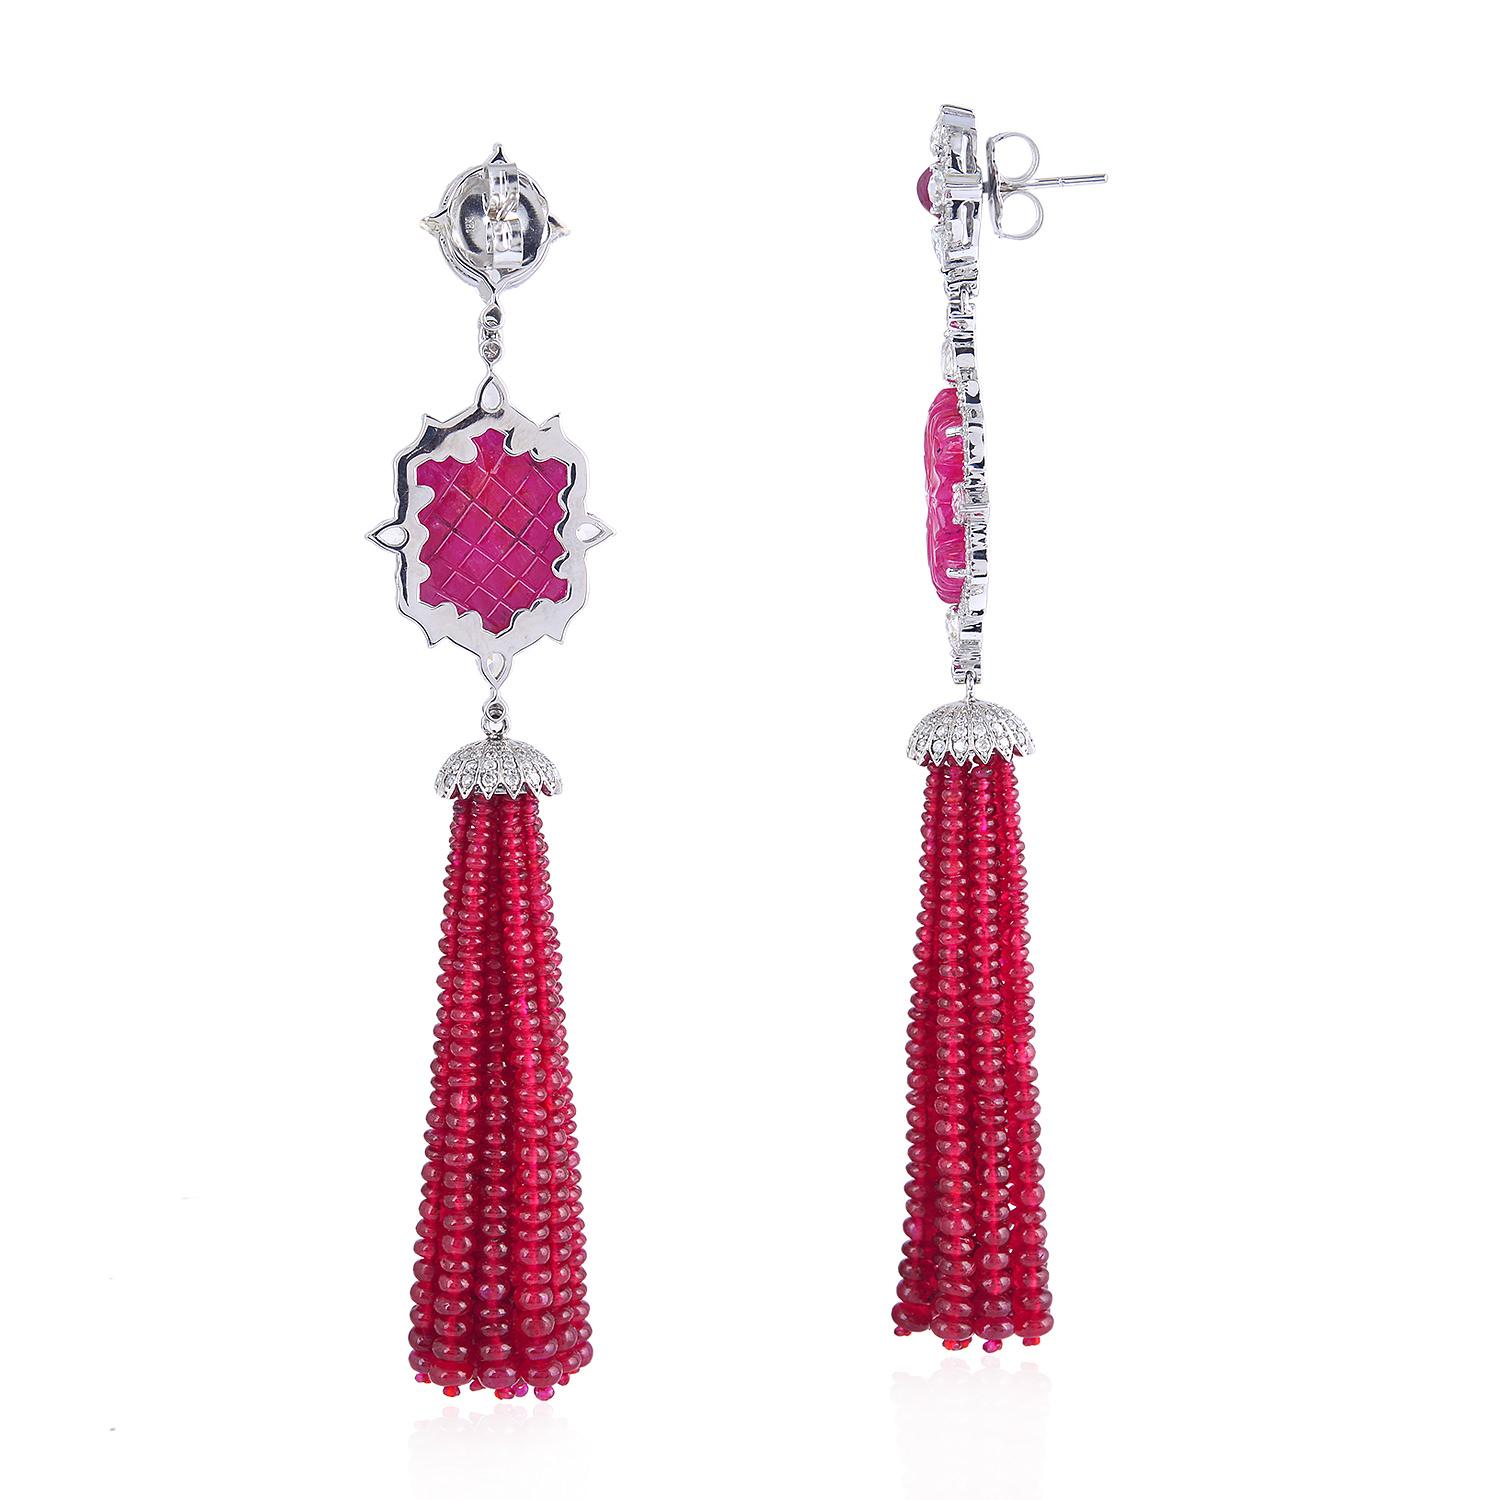 These stunning exceptional tassel earrings is handmade in 18-karat gold.  It is set with 128.2 carats ruby and 3.09 carats of glittering diamonds. 

FOLLOW  MEGHNA JEWELS storefront to view the latest collection & exclusive pieces.  Meghna Jewels is